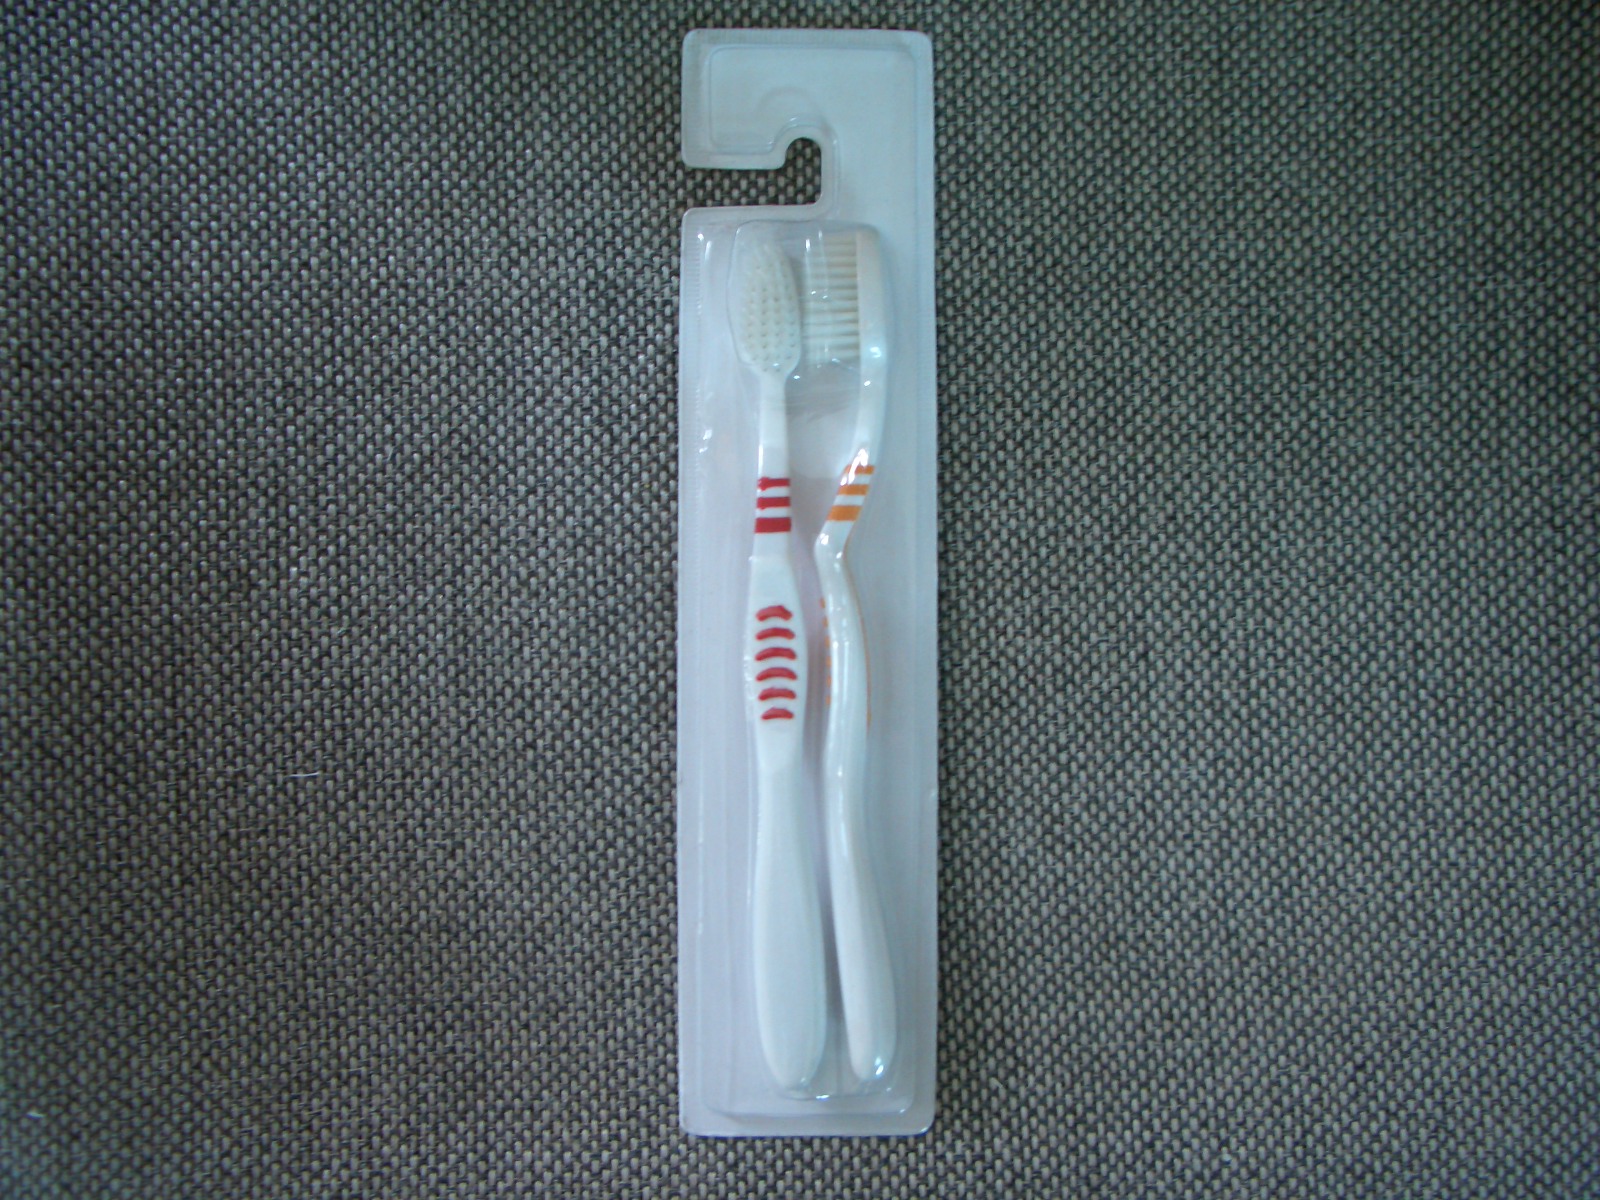 Tooth Brush and Hotel Products